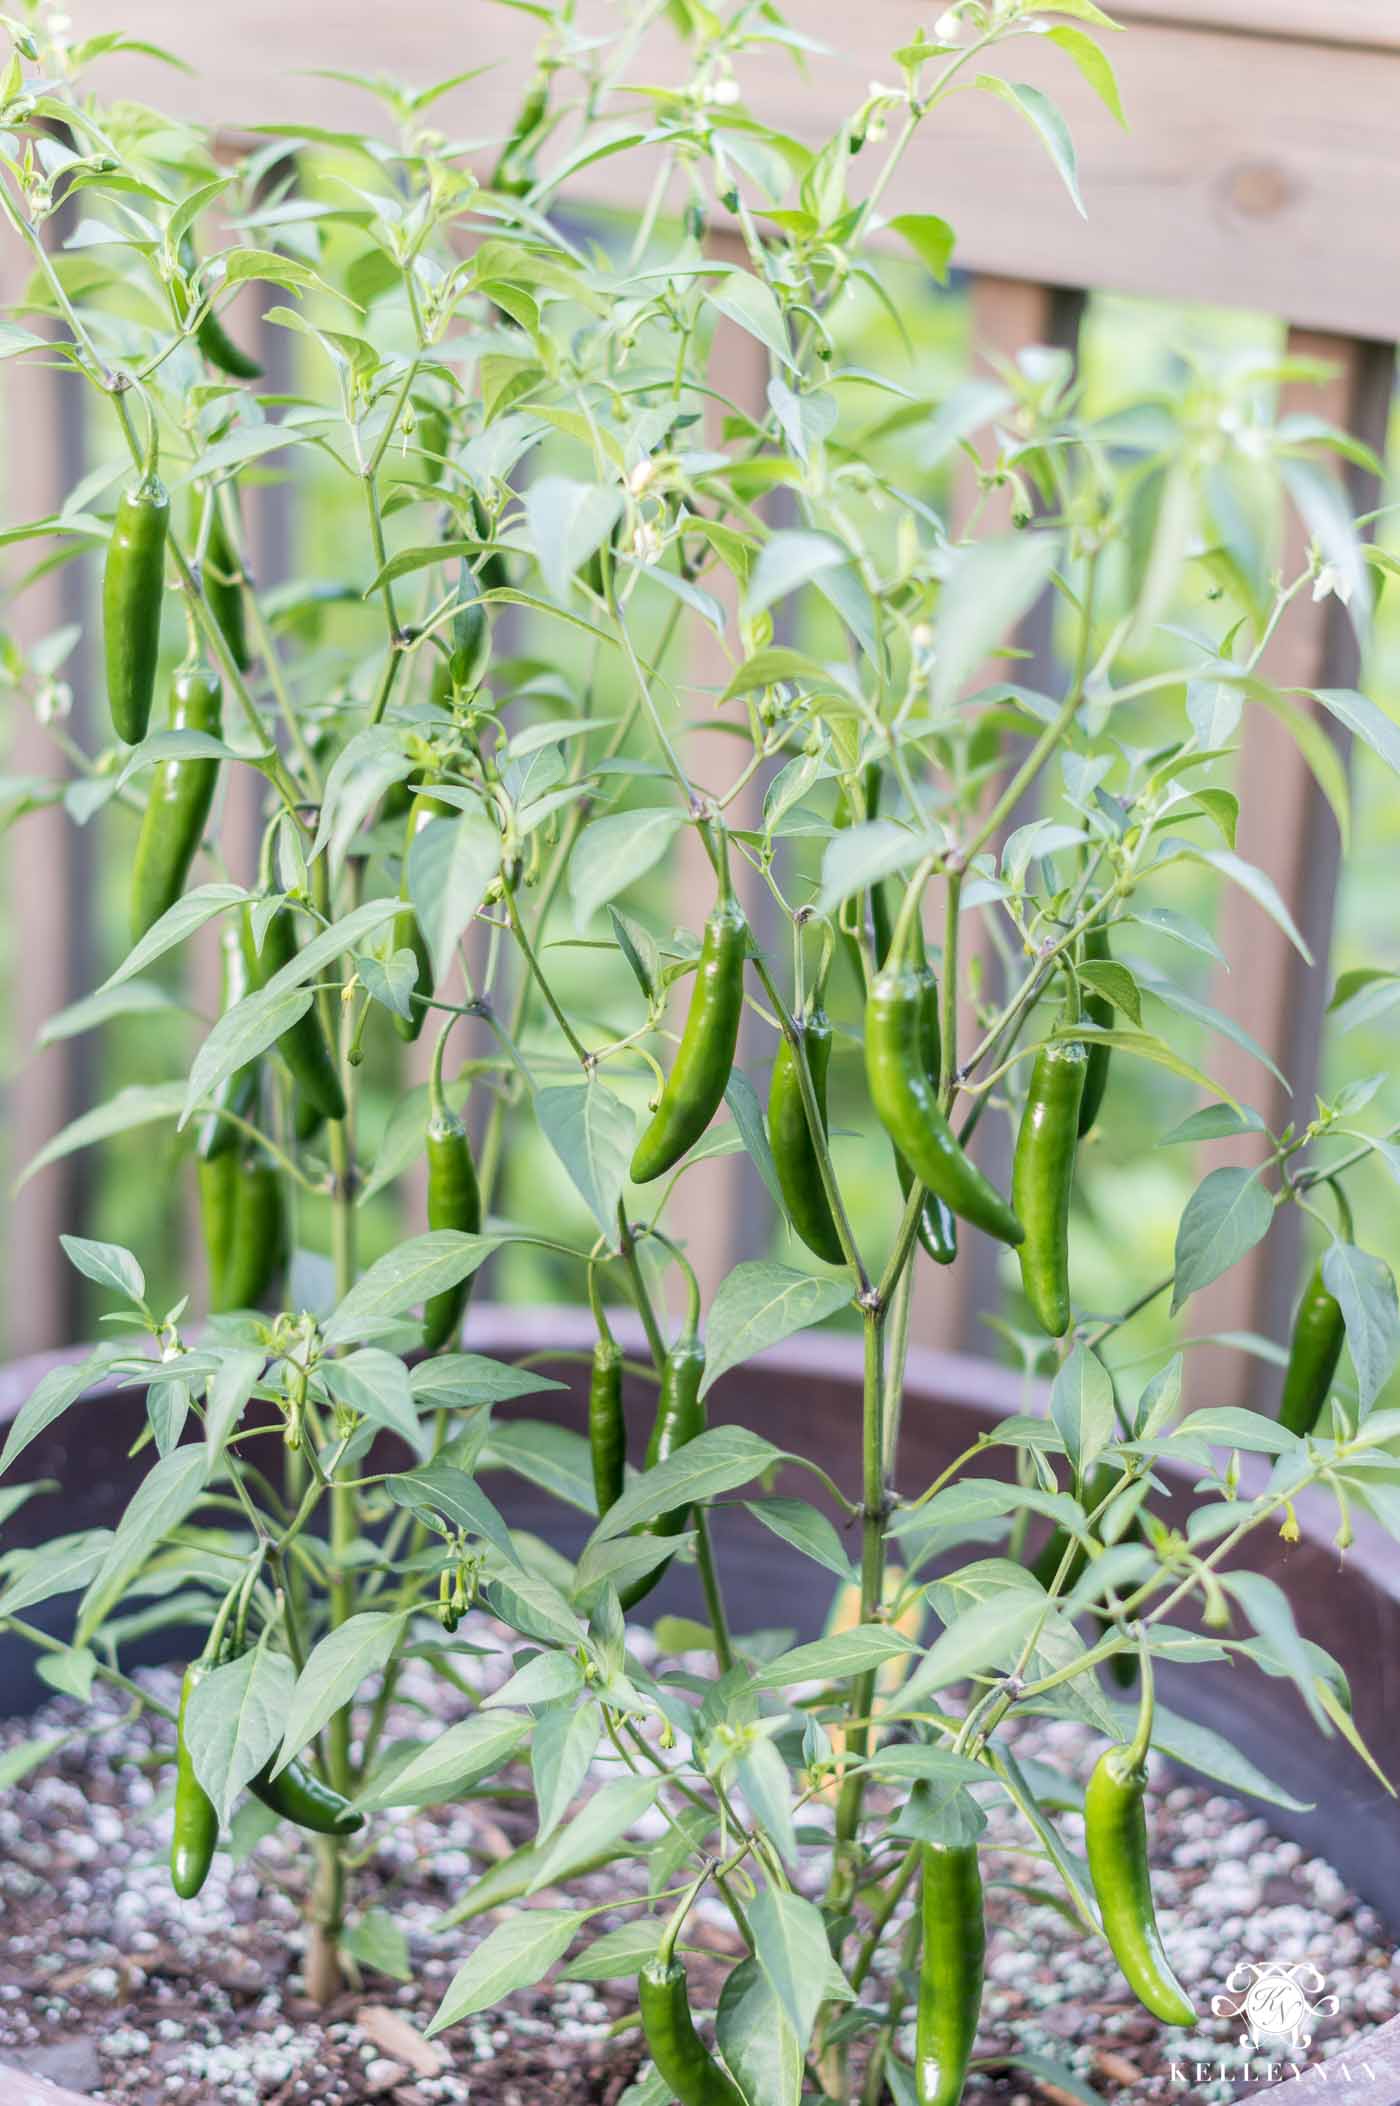 Serrano peppers are perfect vegetables for pots and planters on the porch - super easy to care for, too!